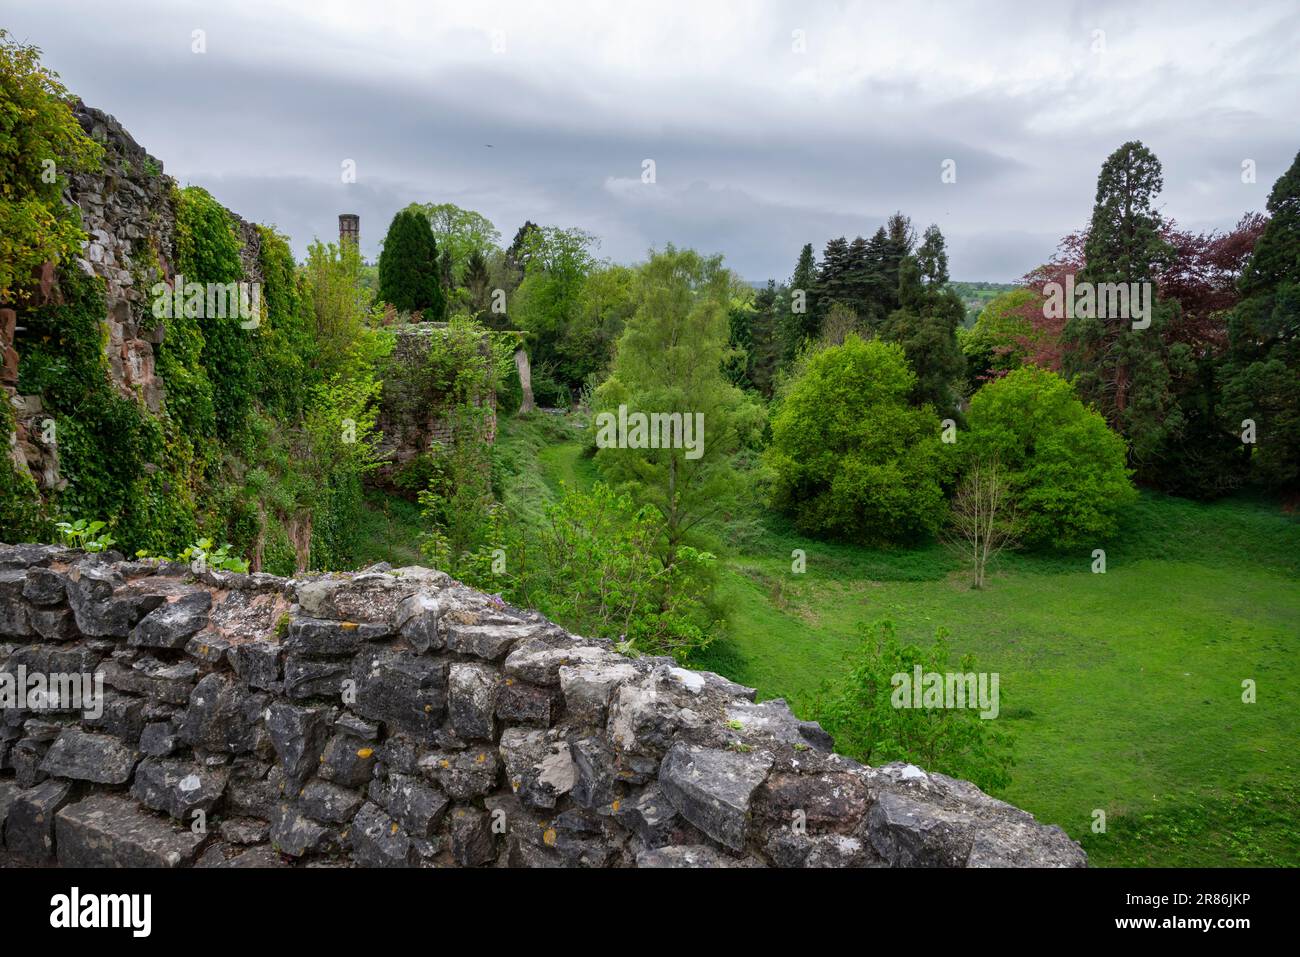 Ruthin Castle (Castell Rhuthun) hotel in the town of Ruthin in the Vale of Clwyd, North Wales. Stock Photo